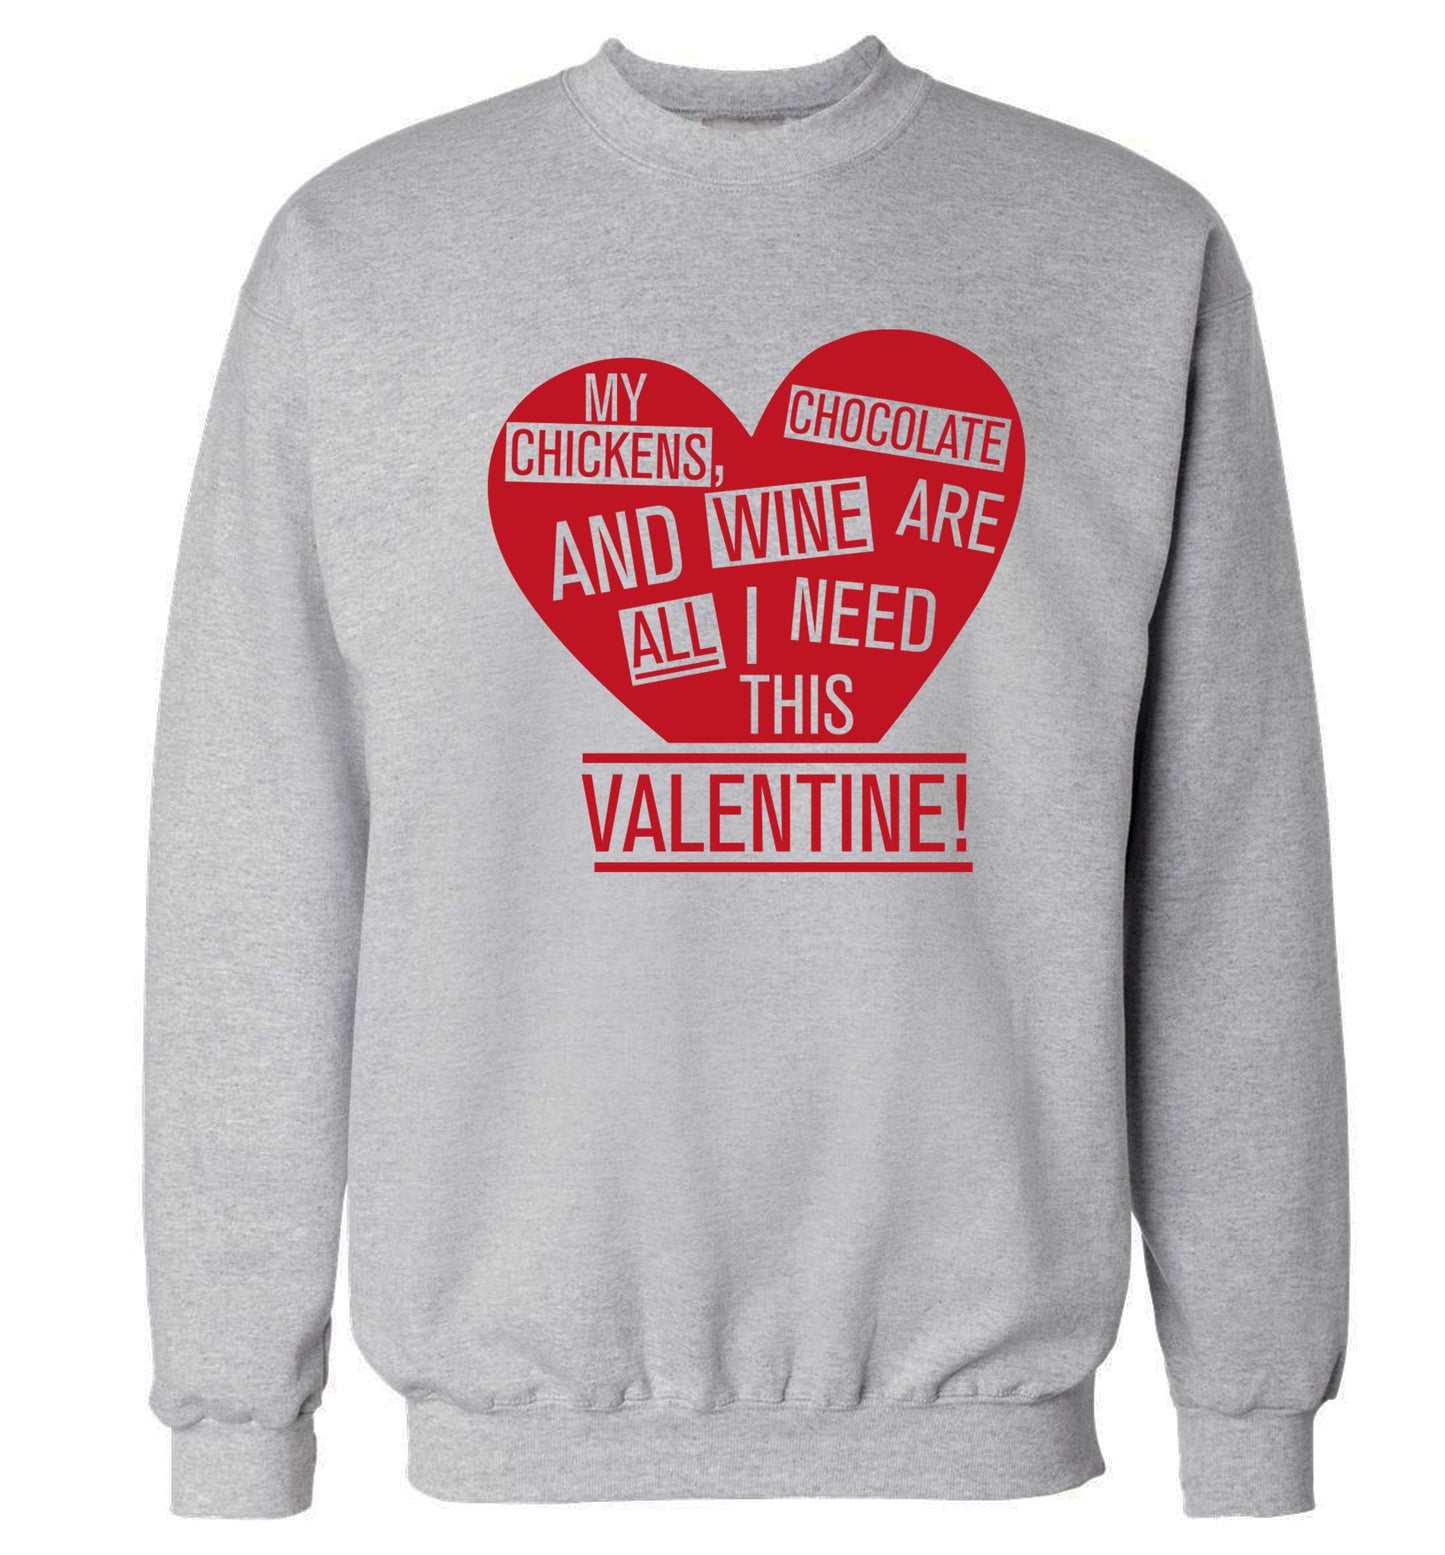 My chickens, chocolate and wine are all I need this valentine! Adult's unisex grey Sweater 2XL